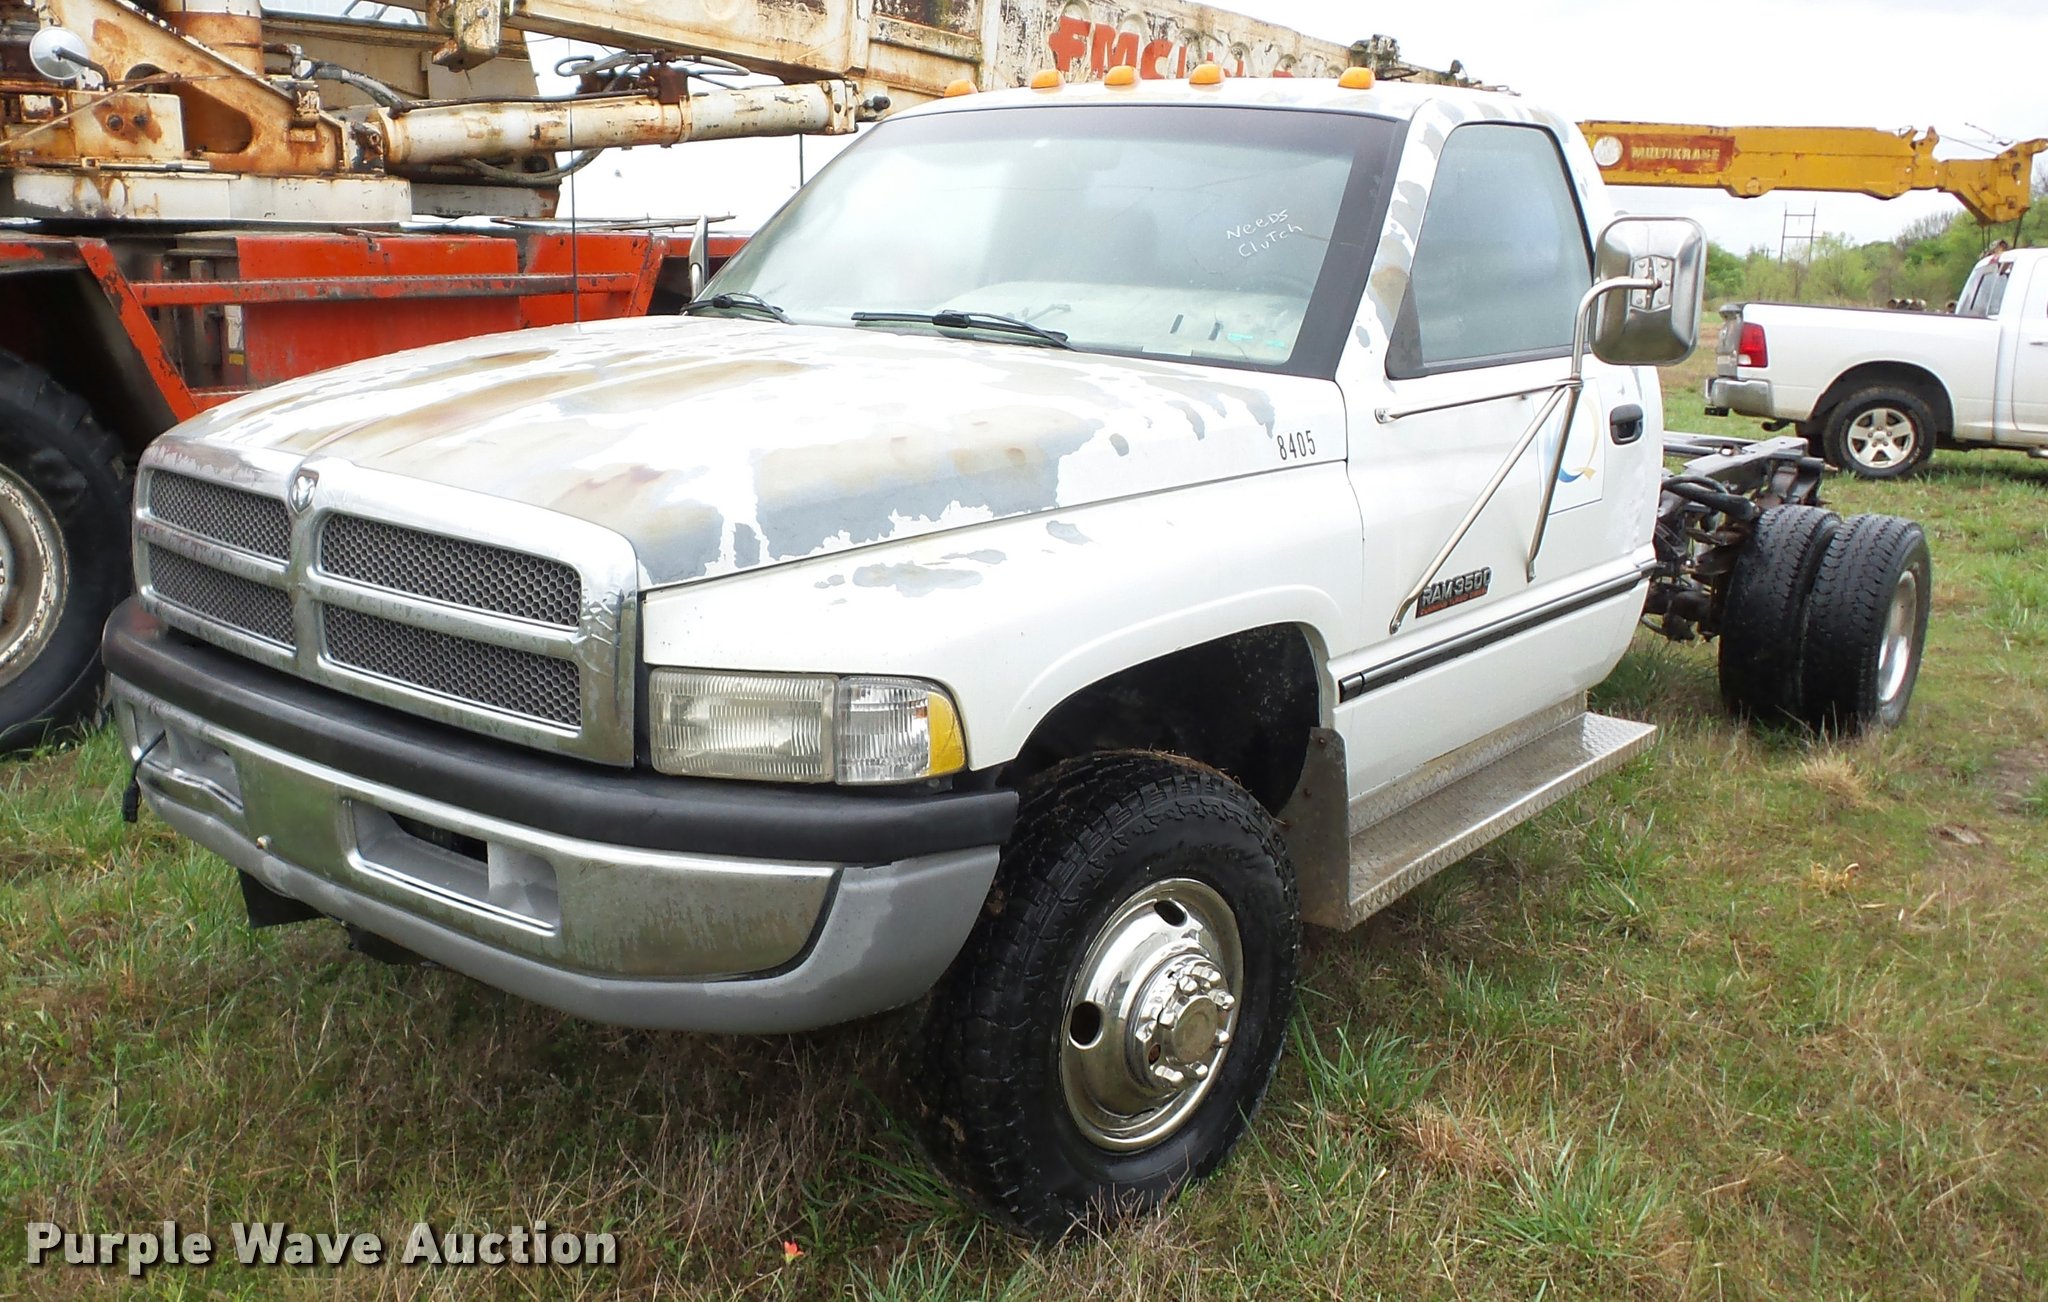 1997 Dodge Ram 3500 pickup truck cab and chassis in Pryor, OK | Item BZ9706  sold | Purple Wave